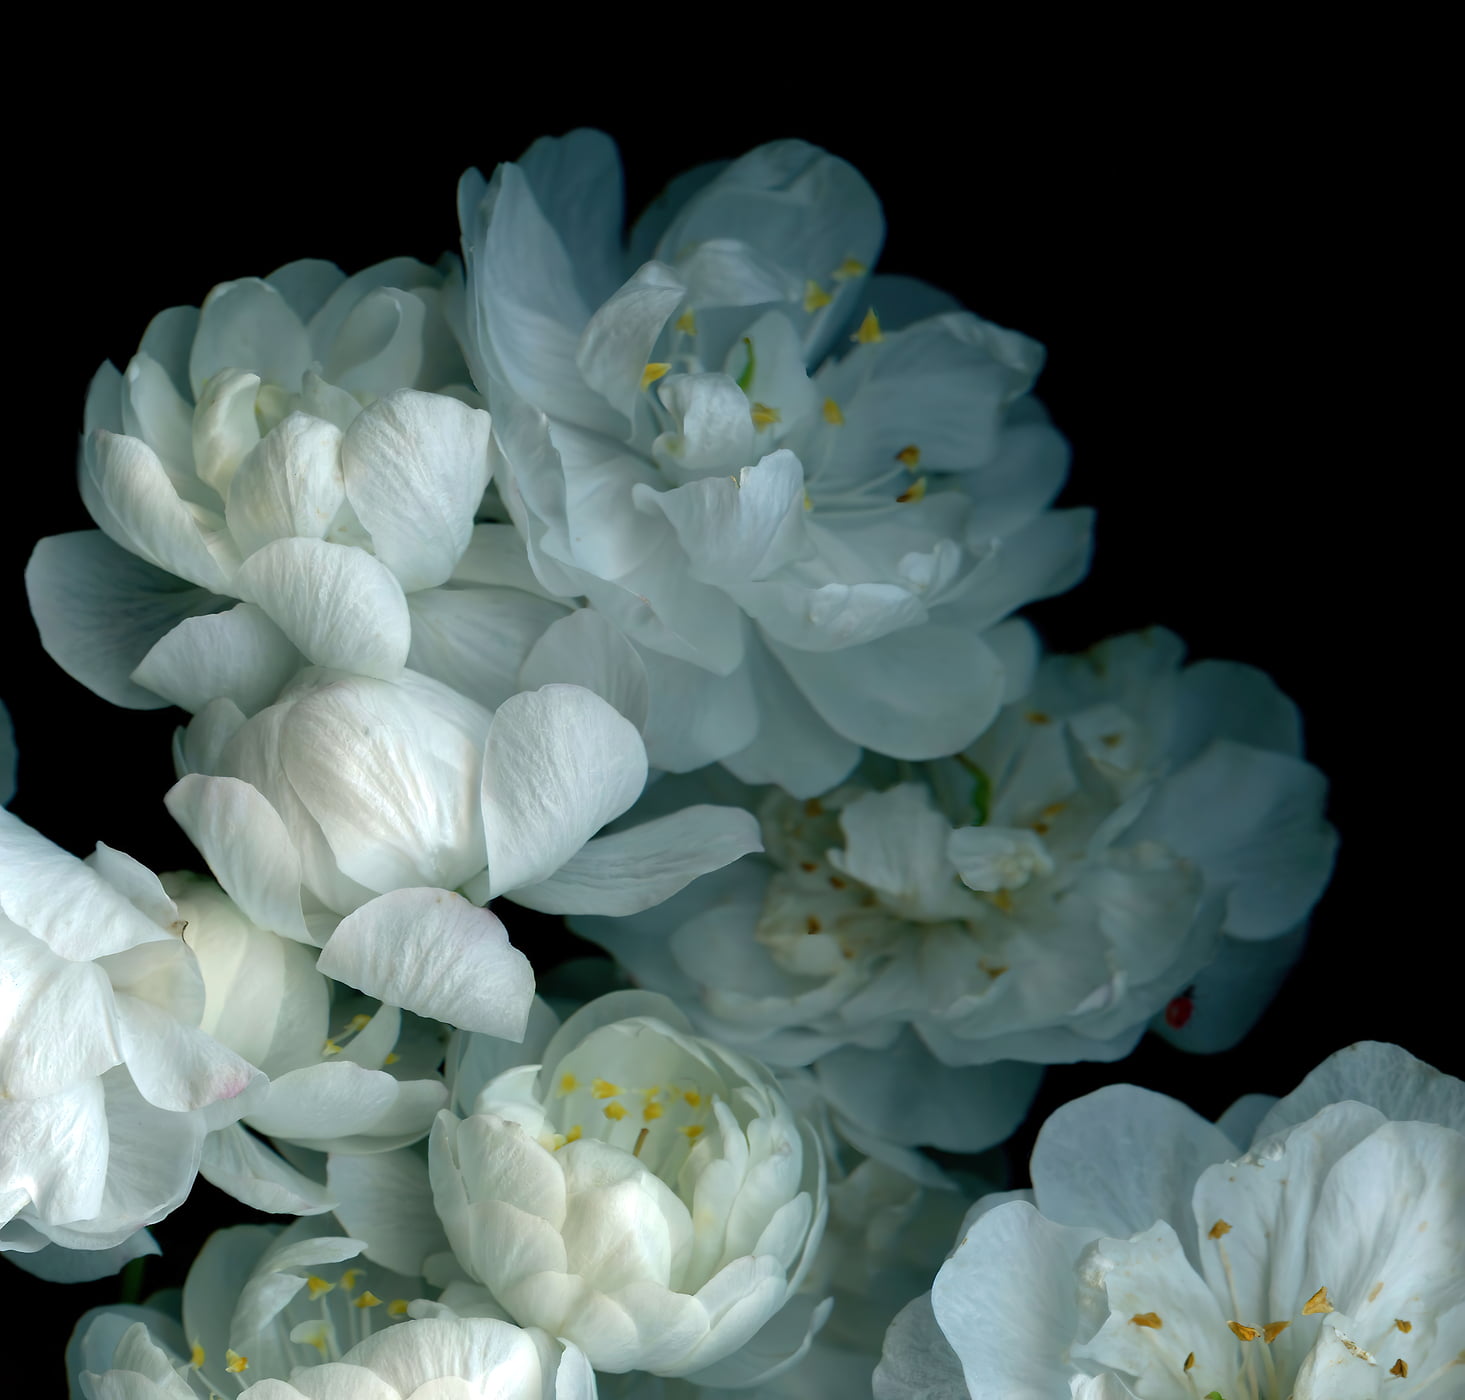 193 megapixels! A very high resolution, large-format VAST photo print of a blossom artwork created by Anja Axelsson